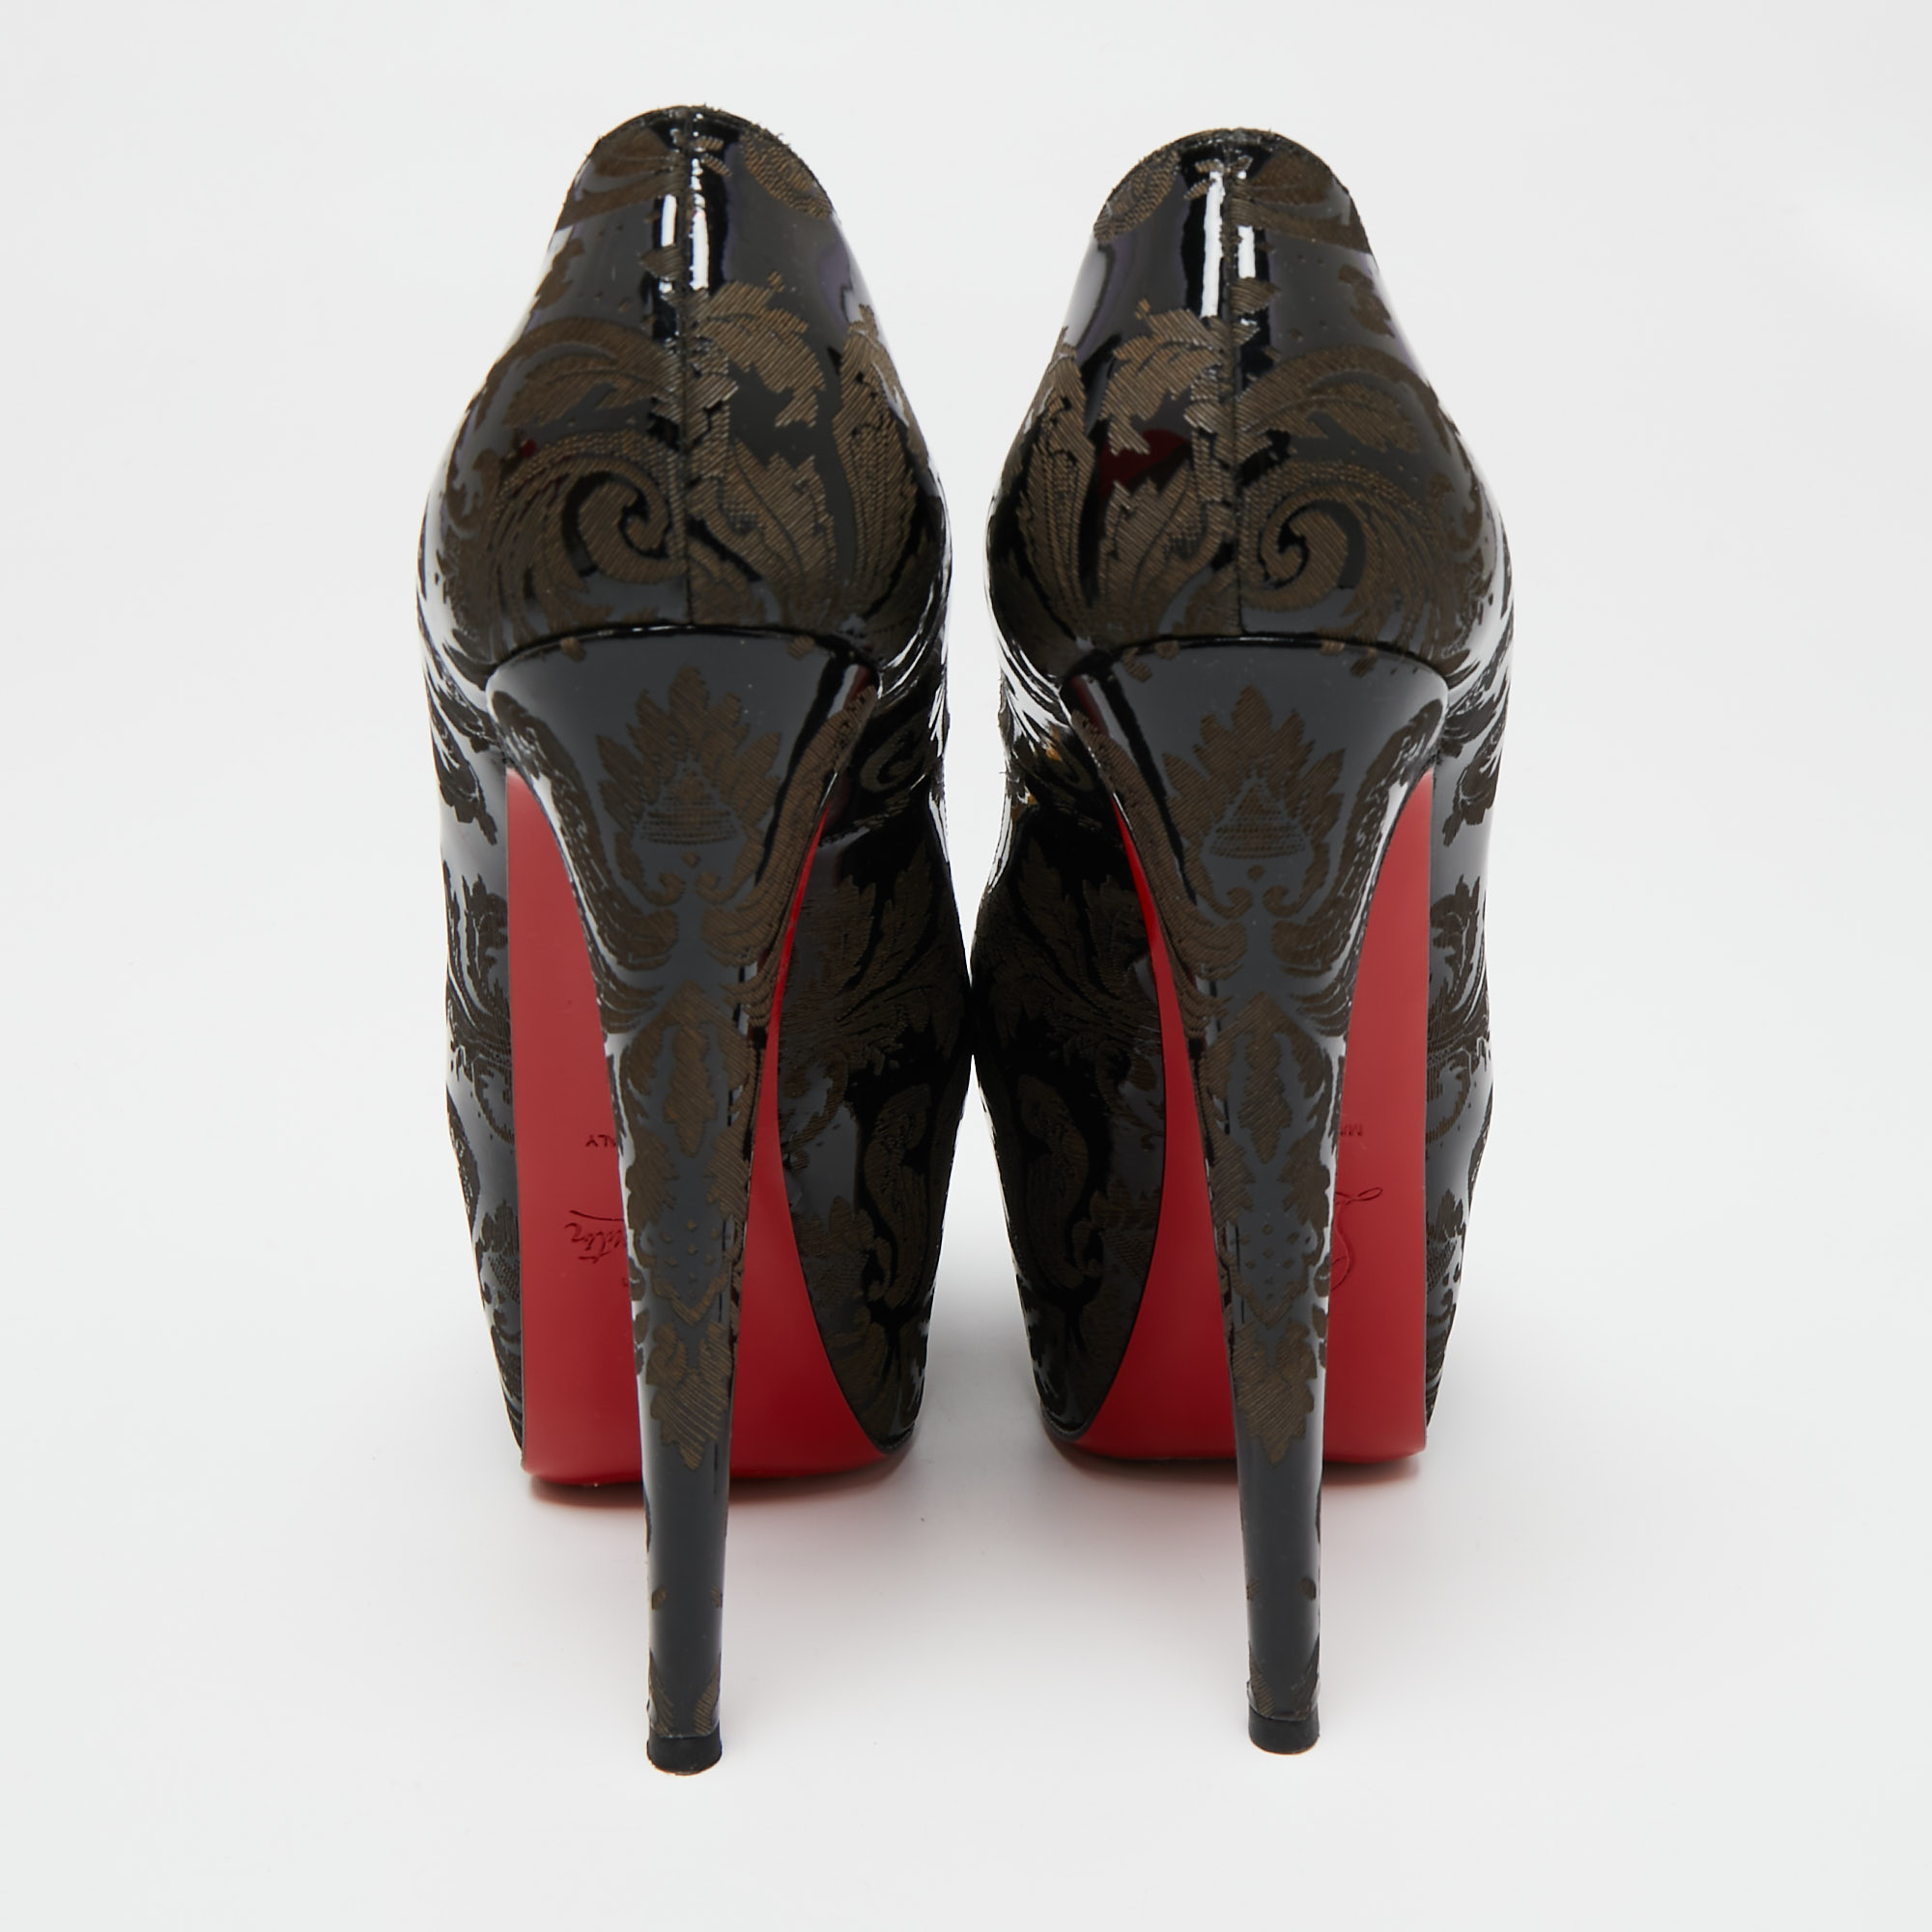 Christian Louboutin Black/Brown Patent Leather Arabesque Highness Peep-Toe Pumps Size 36.5